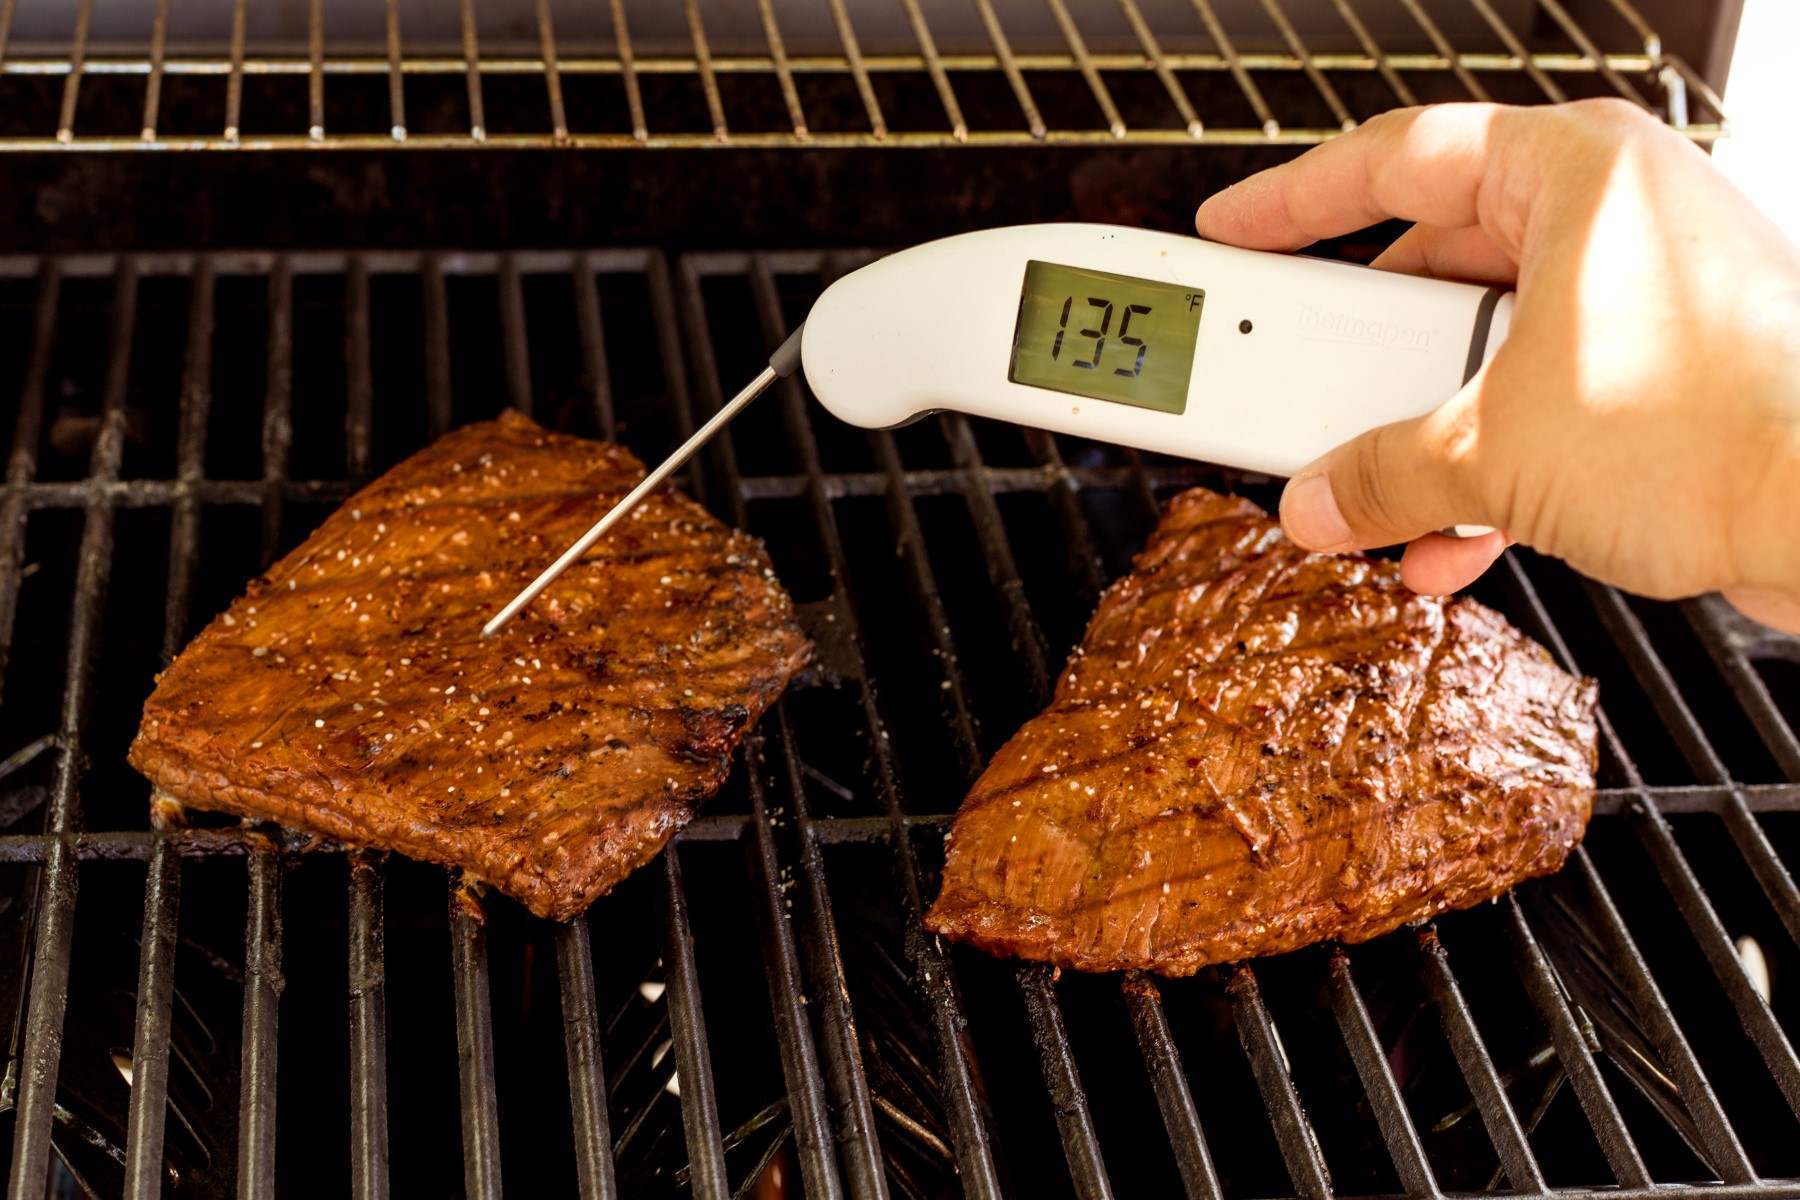 Marinated flank steak cooking on the grill, with a instant read thermometer that reads 135 degrees F.